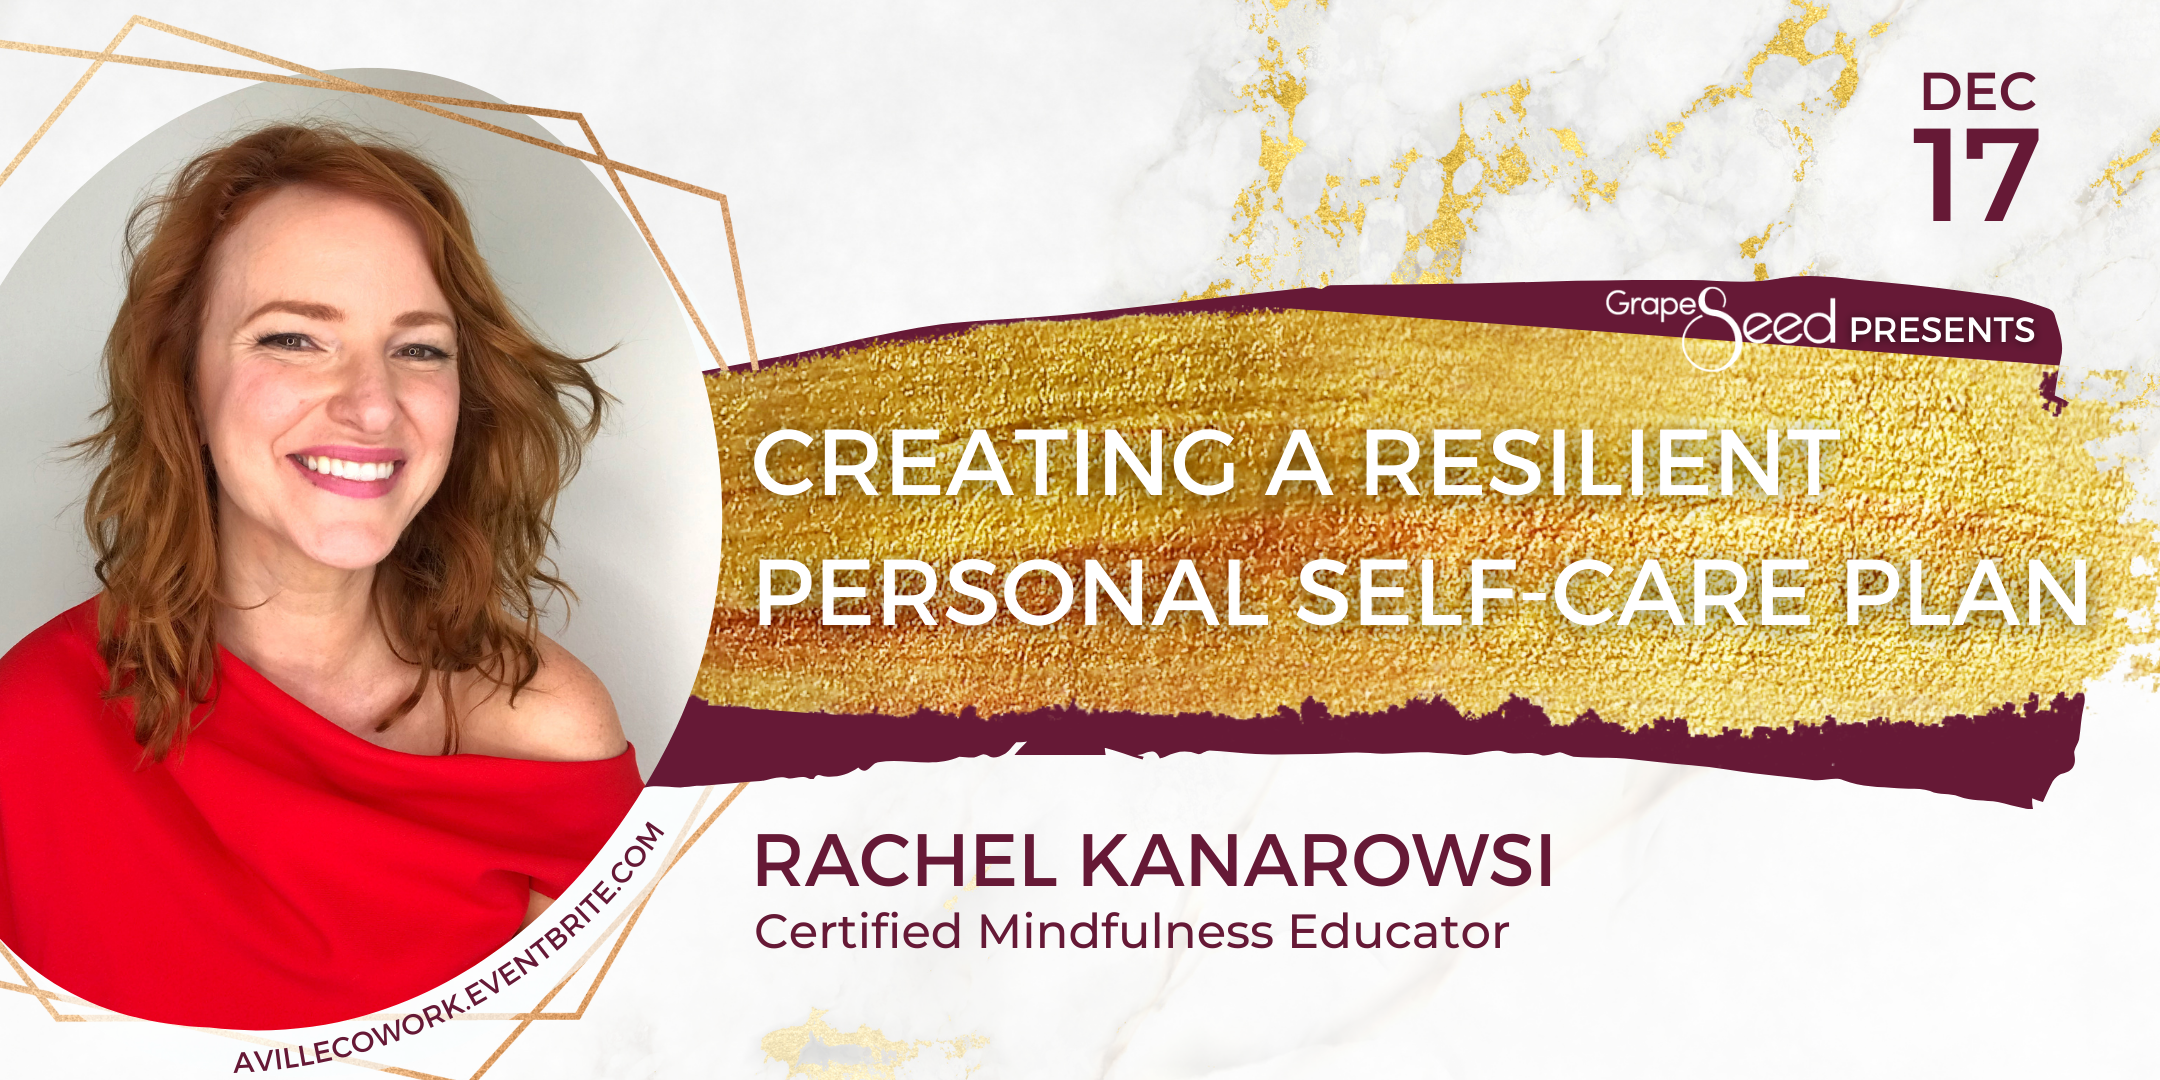 Lunch & Learn banner — Creating a Resilient Personal Self-Care Plan with Rachel Kanarowski on December 17.